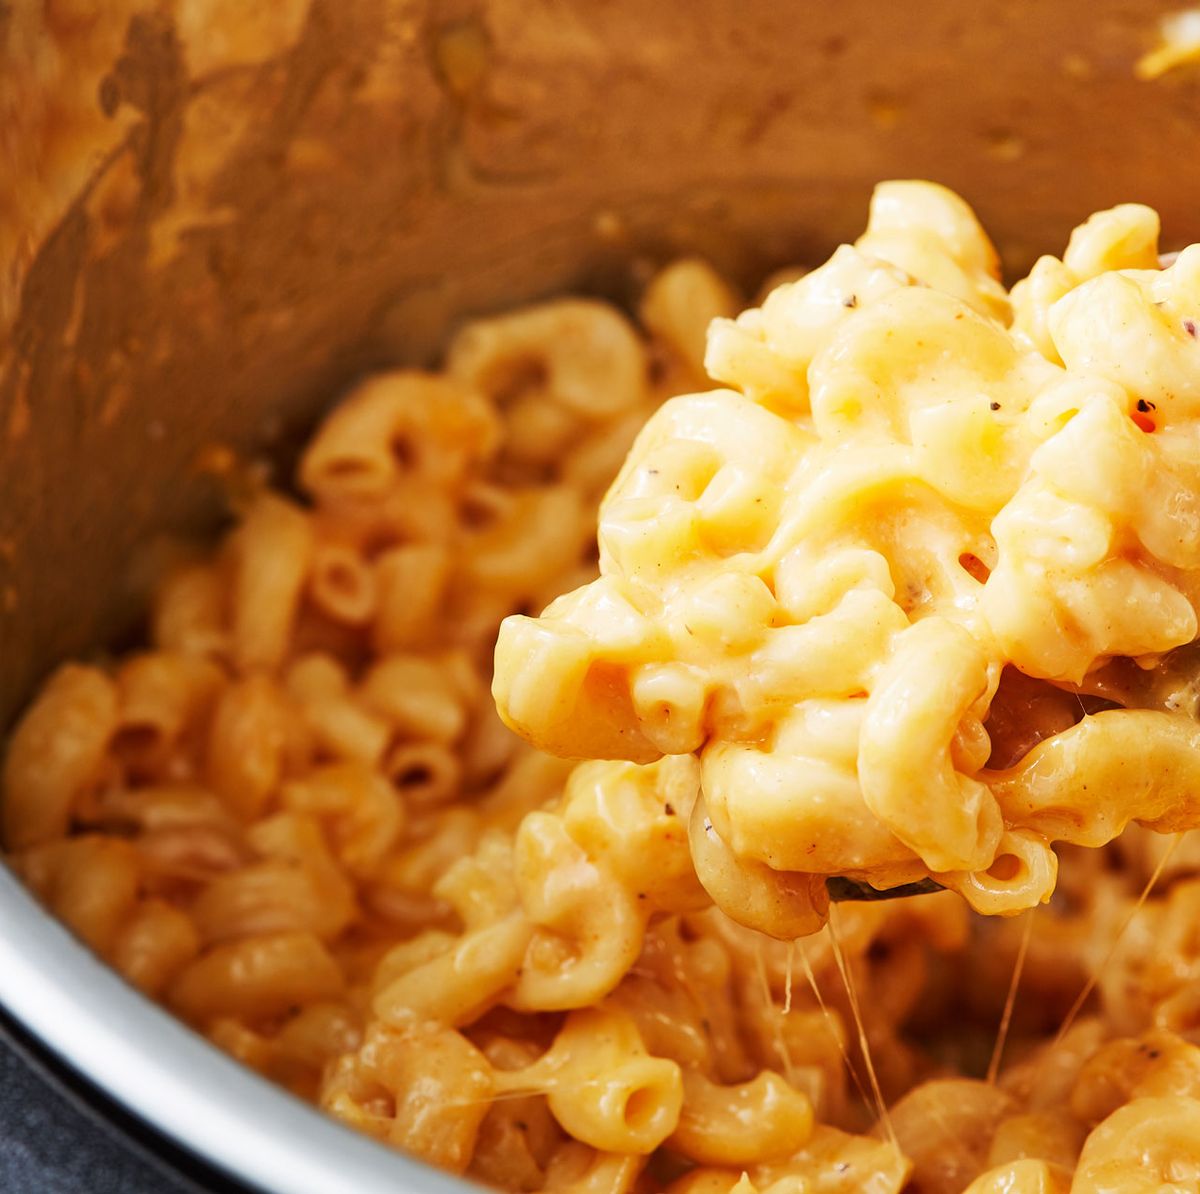 https://hips.hearstapps.com/hmg-prod/images/190402-instant-pot-mac-and-cheese-horizontal-151-1555104888.jpg?crop=0.670xw:1.00xh;0.300xw,0&resize=1200:*